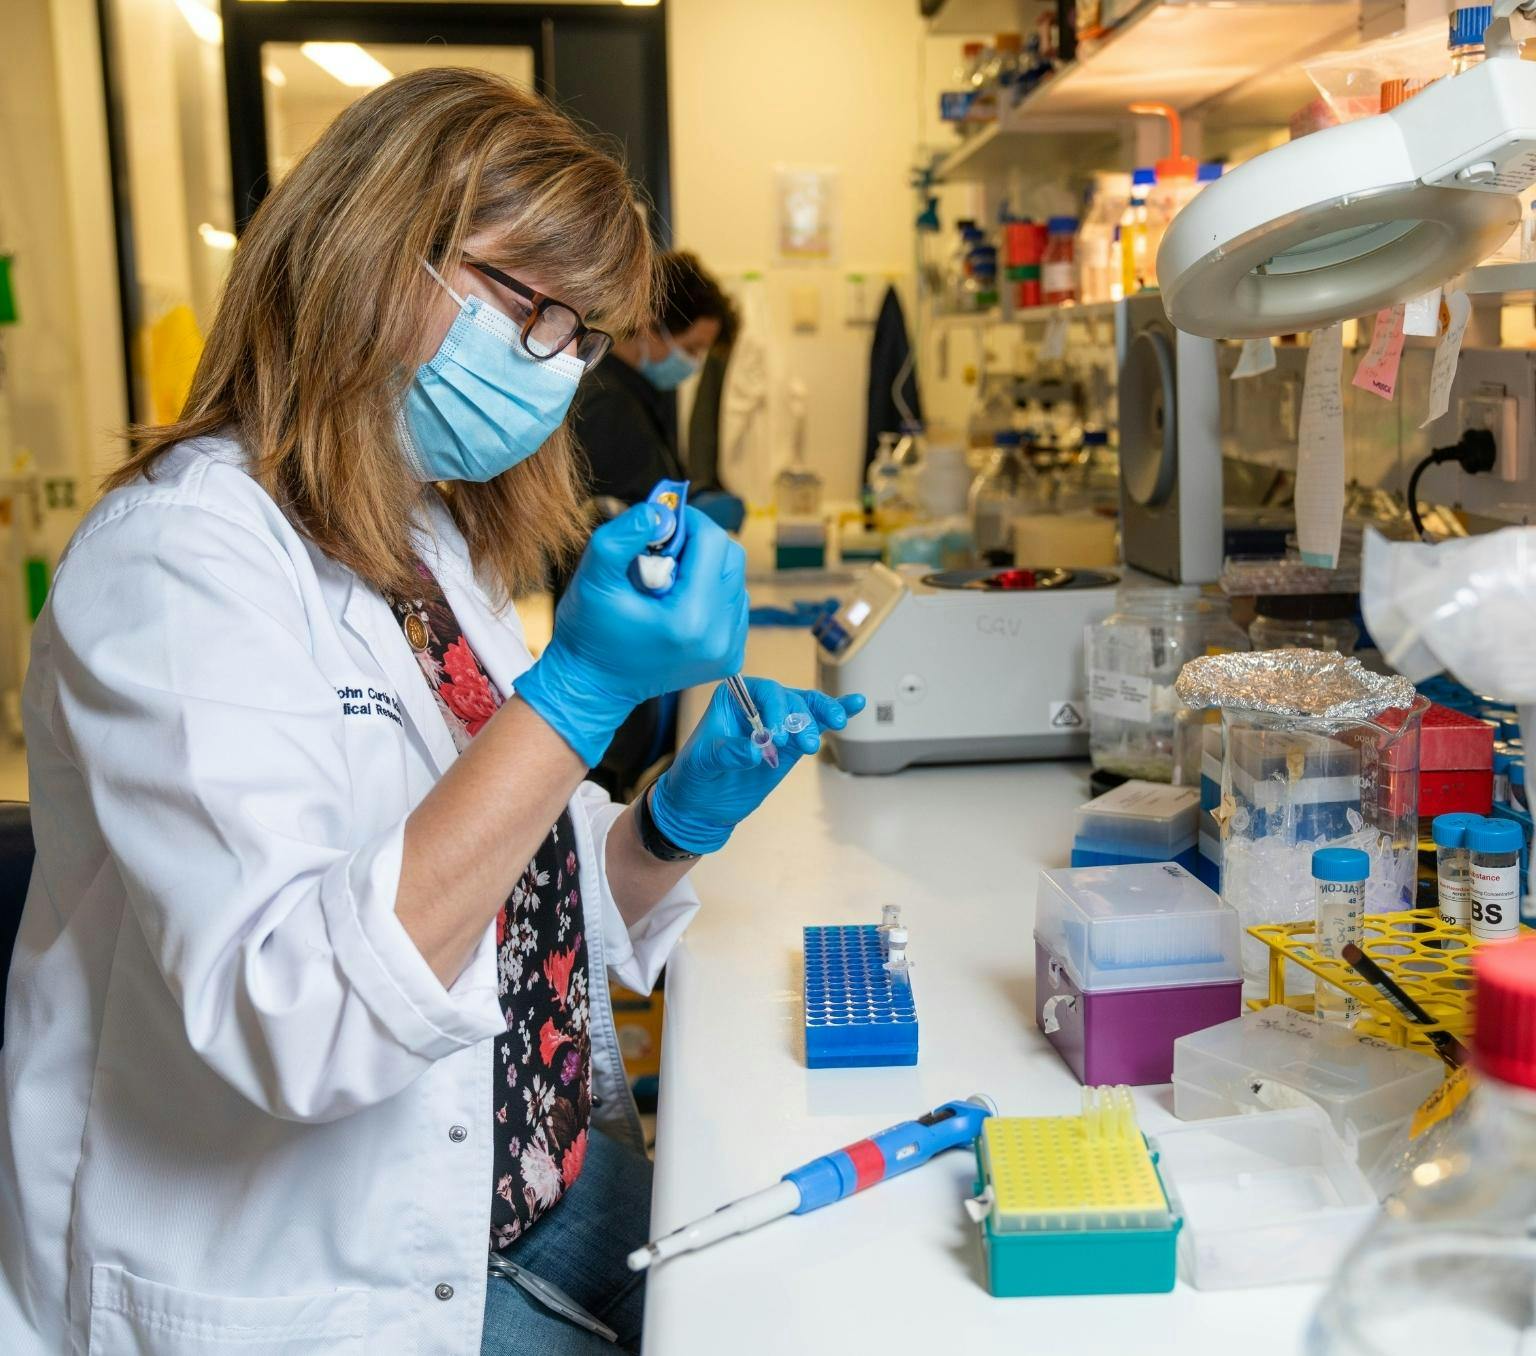 Dr Vicki Athanasopoulos works on lupus research in the lab. She is wearing a white lab coat and blue medical gloves. She is using a measurement device to carefully inject substances into test tubes.